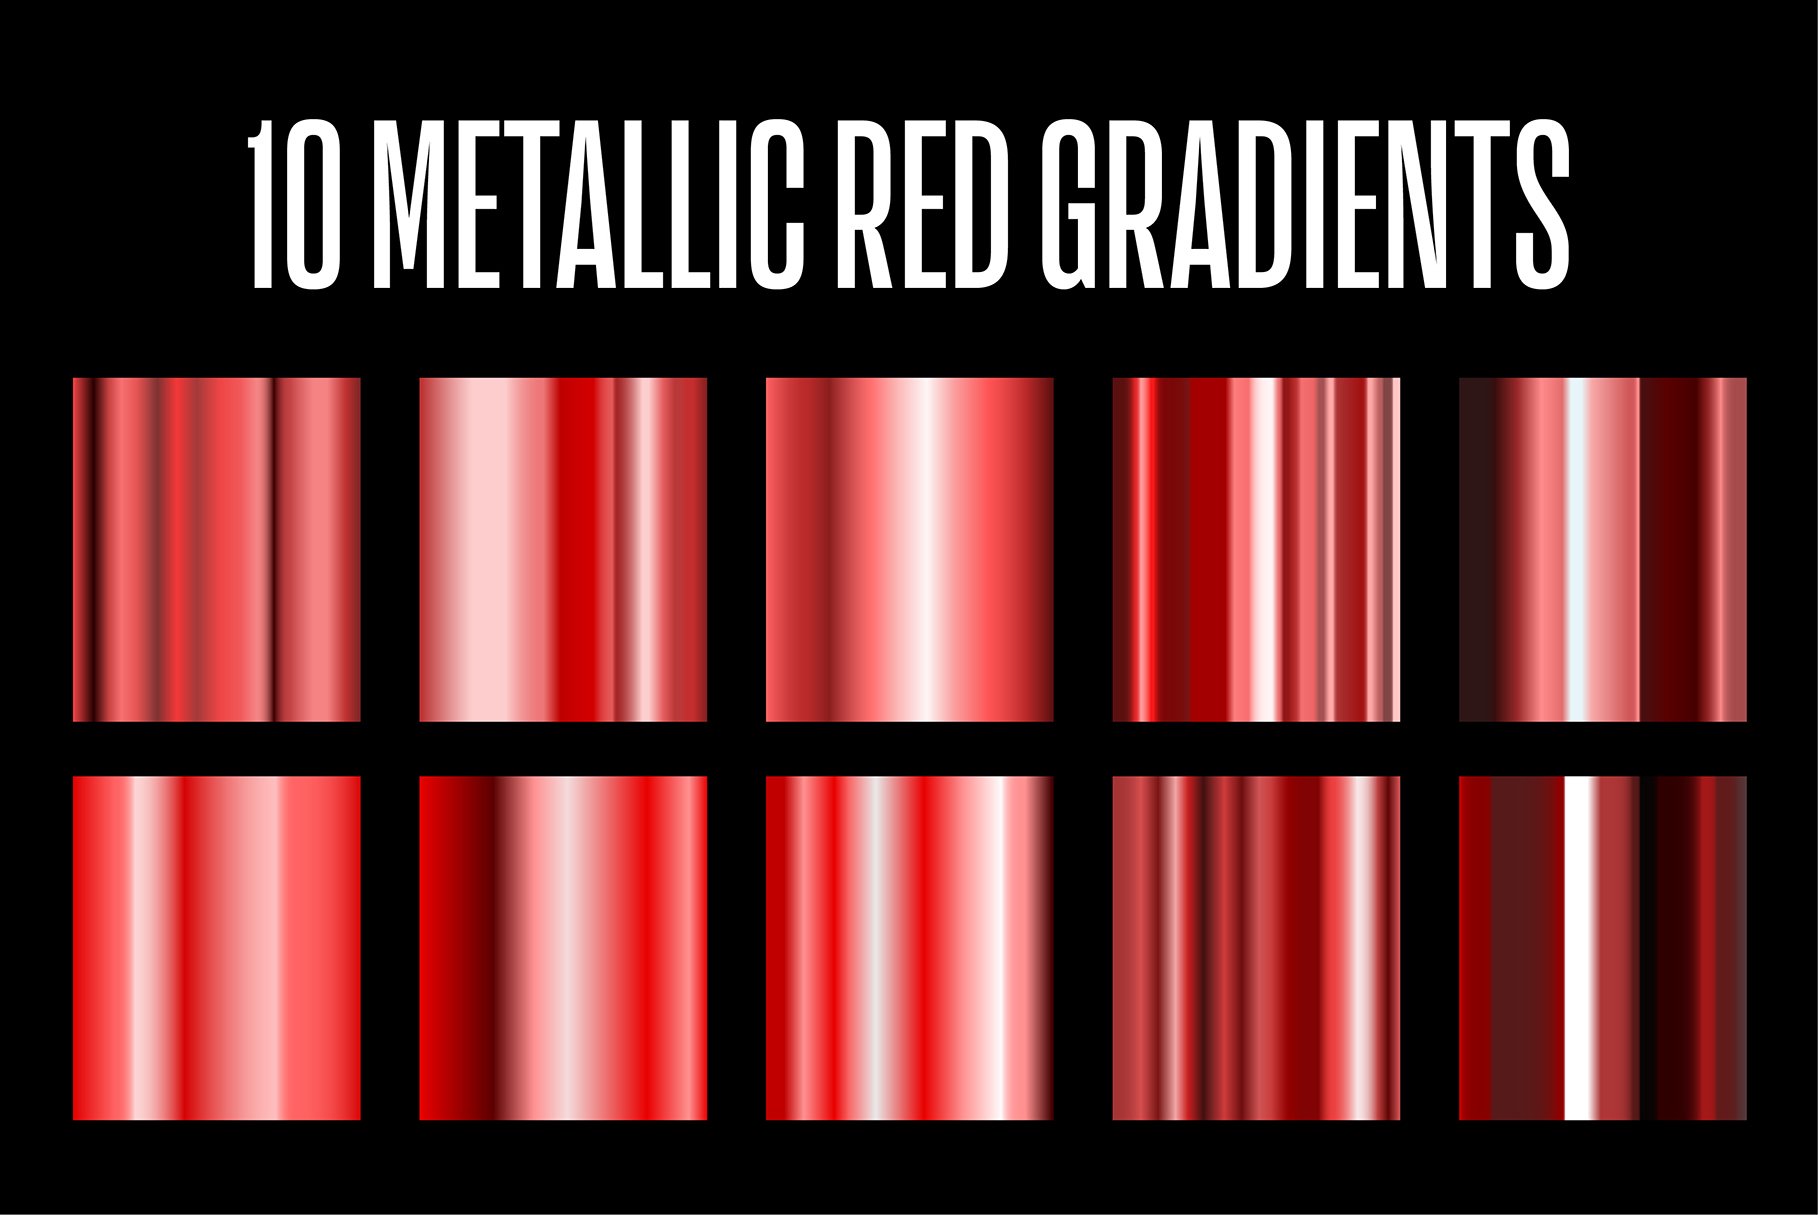 10 Metallic Red Gradients .AI cover image.